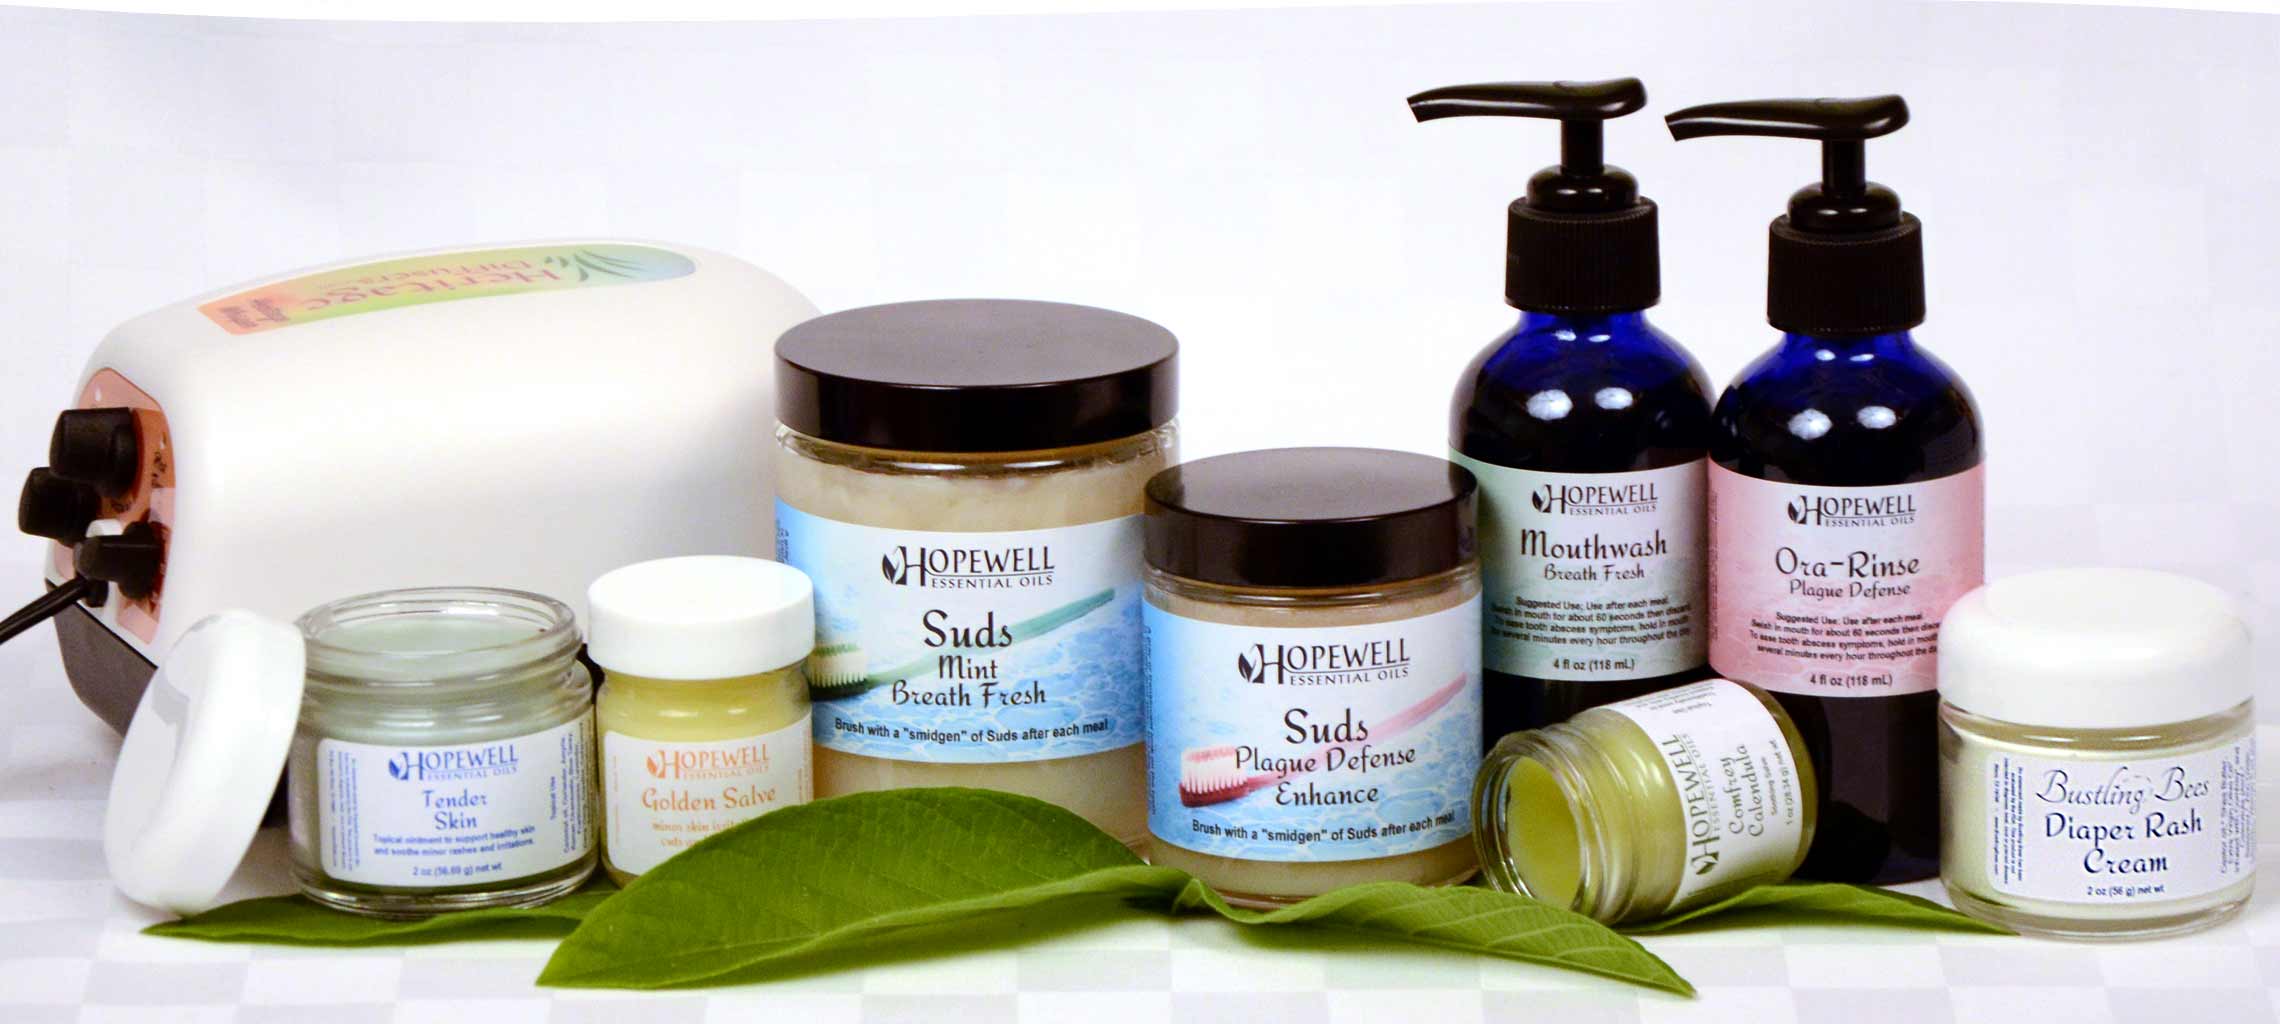 Hopewell Essential Oils Salve and Suds